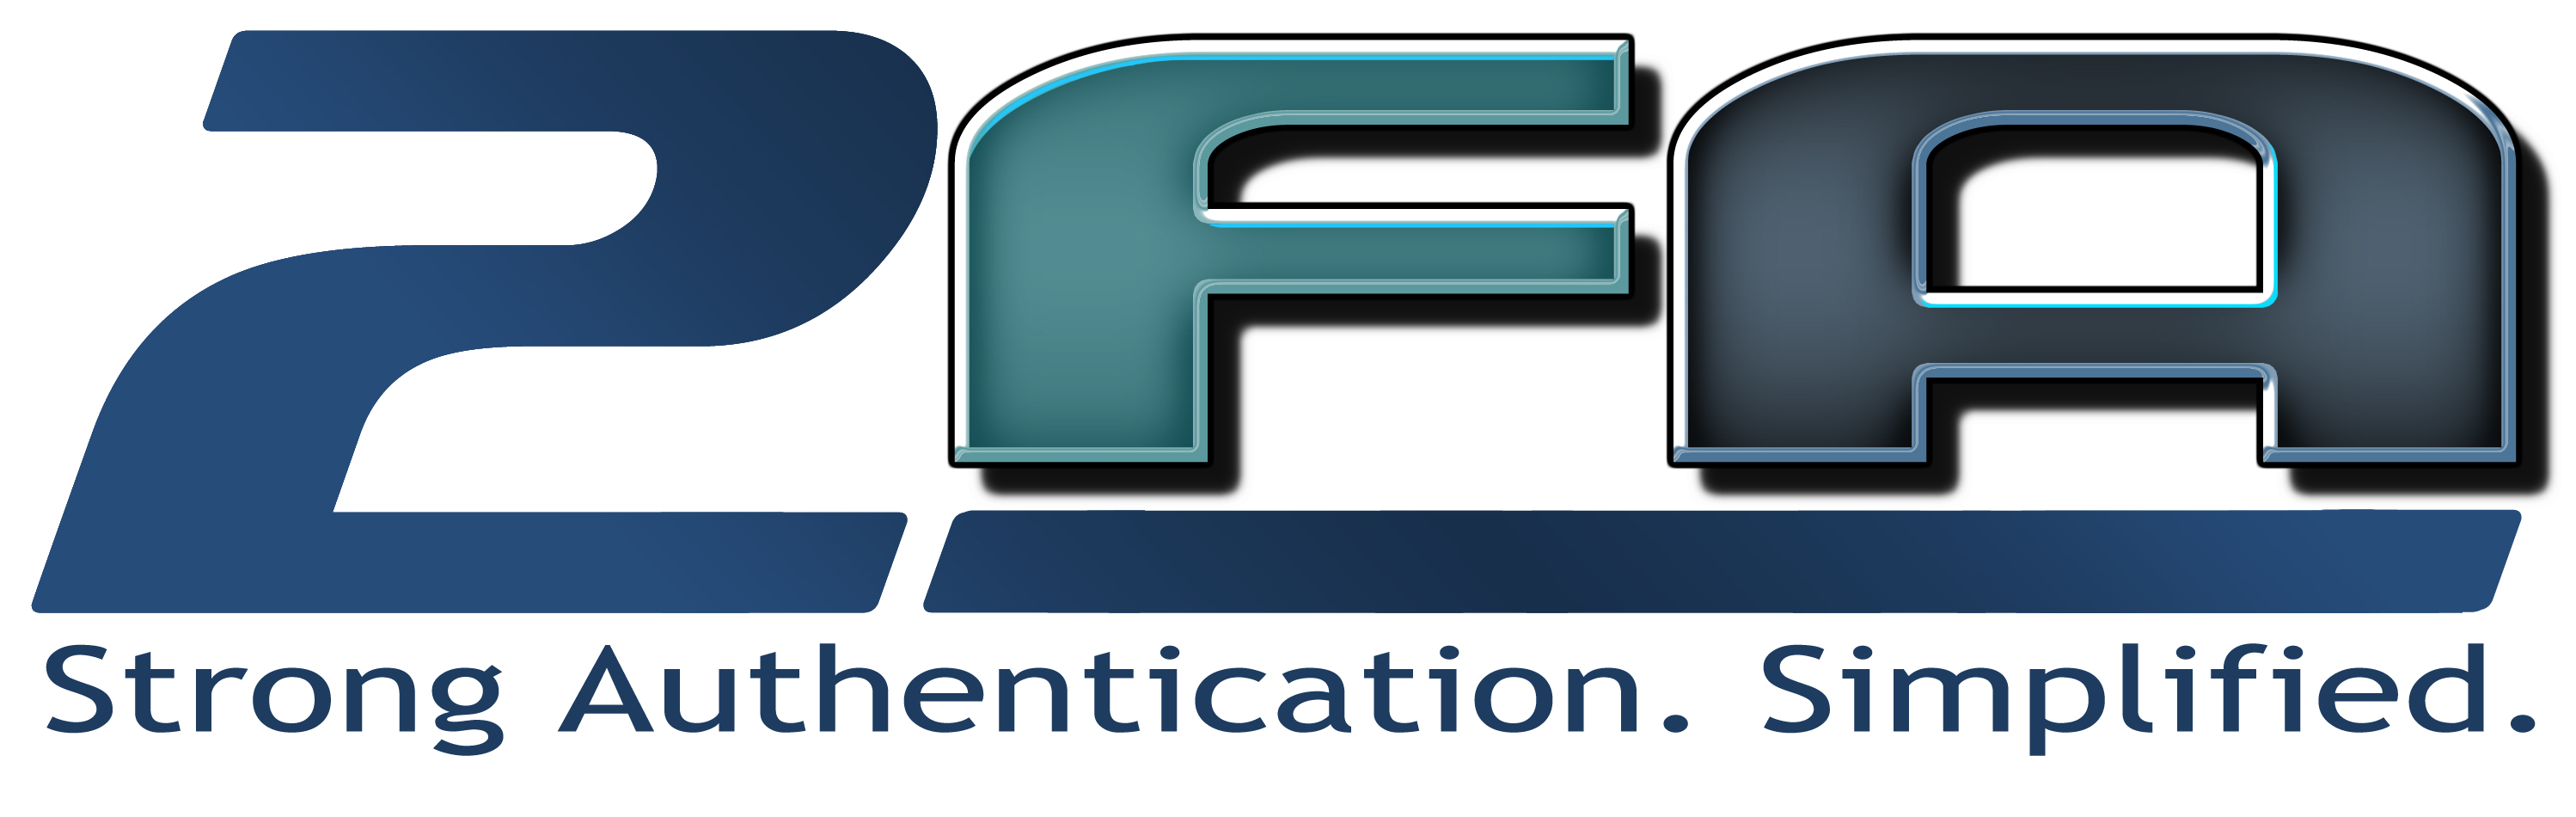 2FA - Strong Authentication, Simplified.